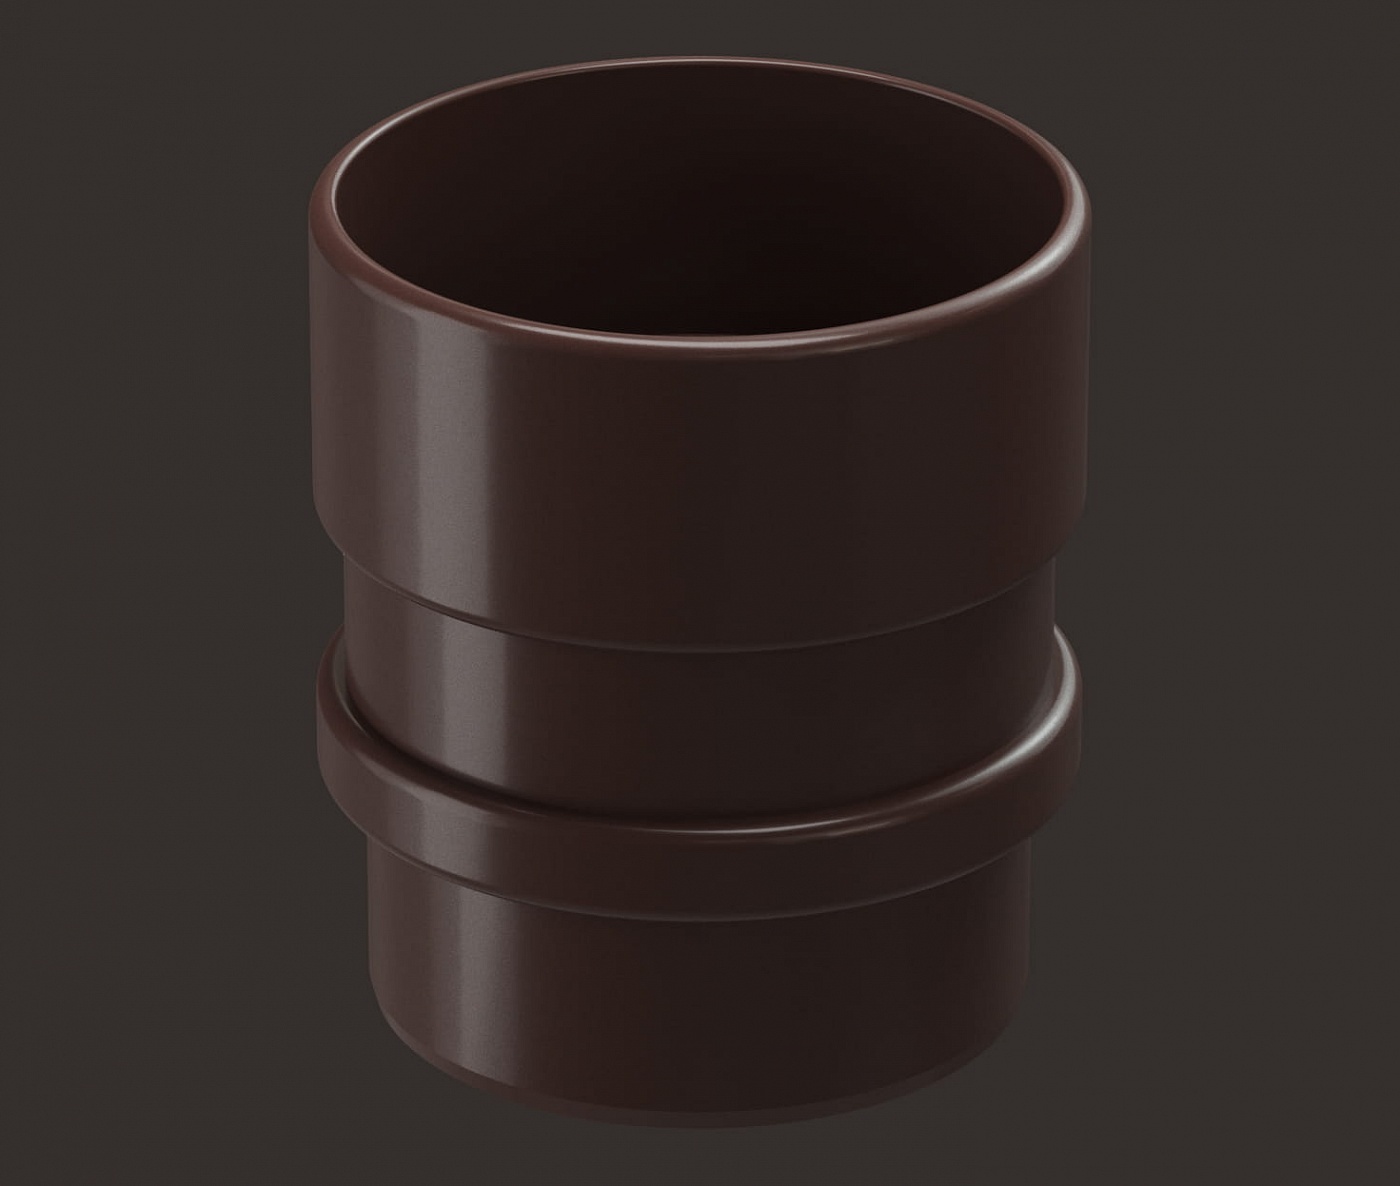 Водостоки - LUX SERIES Chocolate RAL 8019 - Elements of the drainage system - Pipe connector